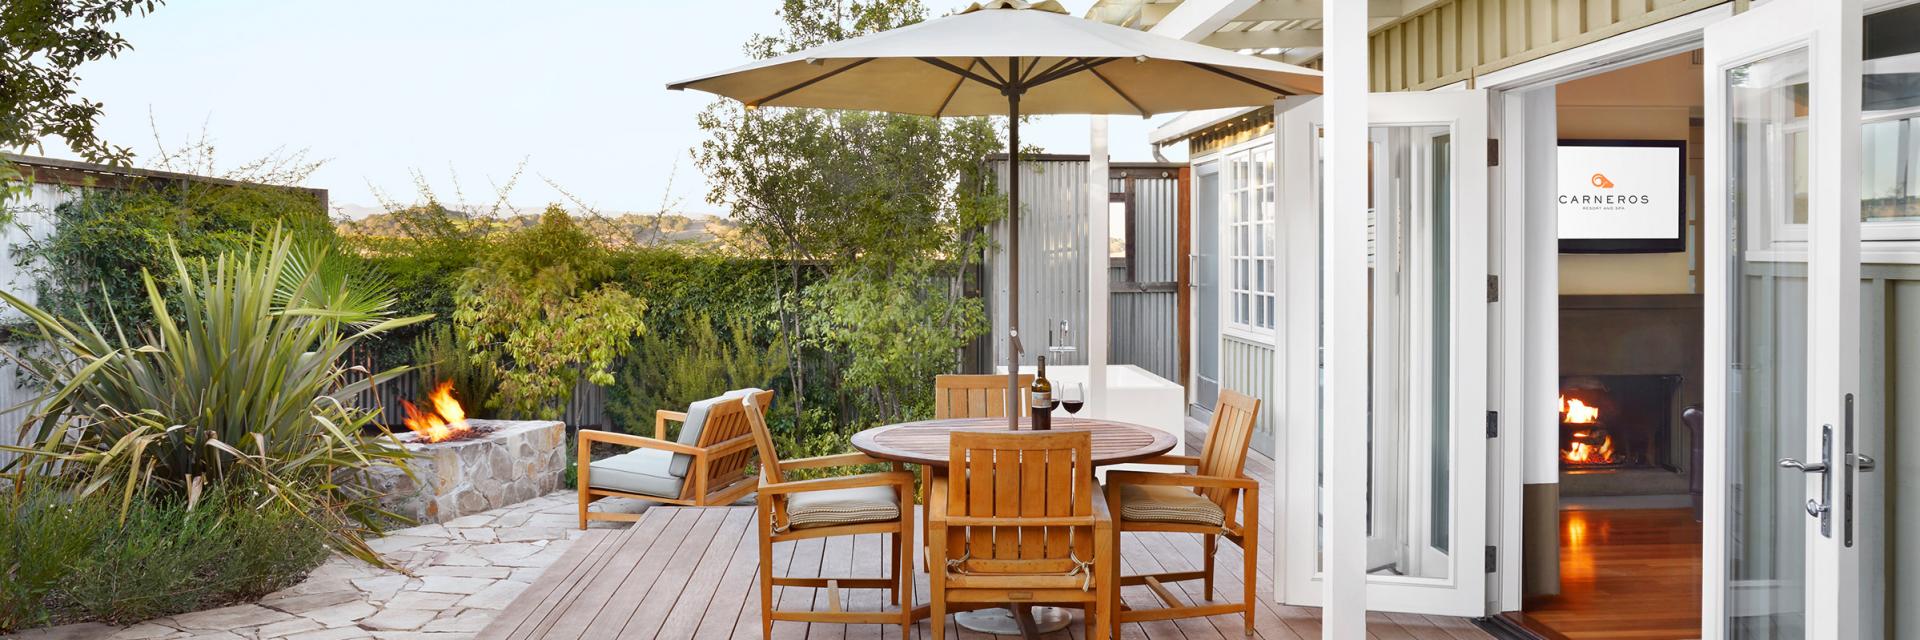 Enjoy the courtyards of one of the units at Carneros.